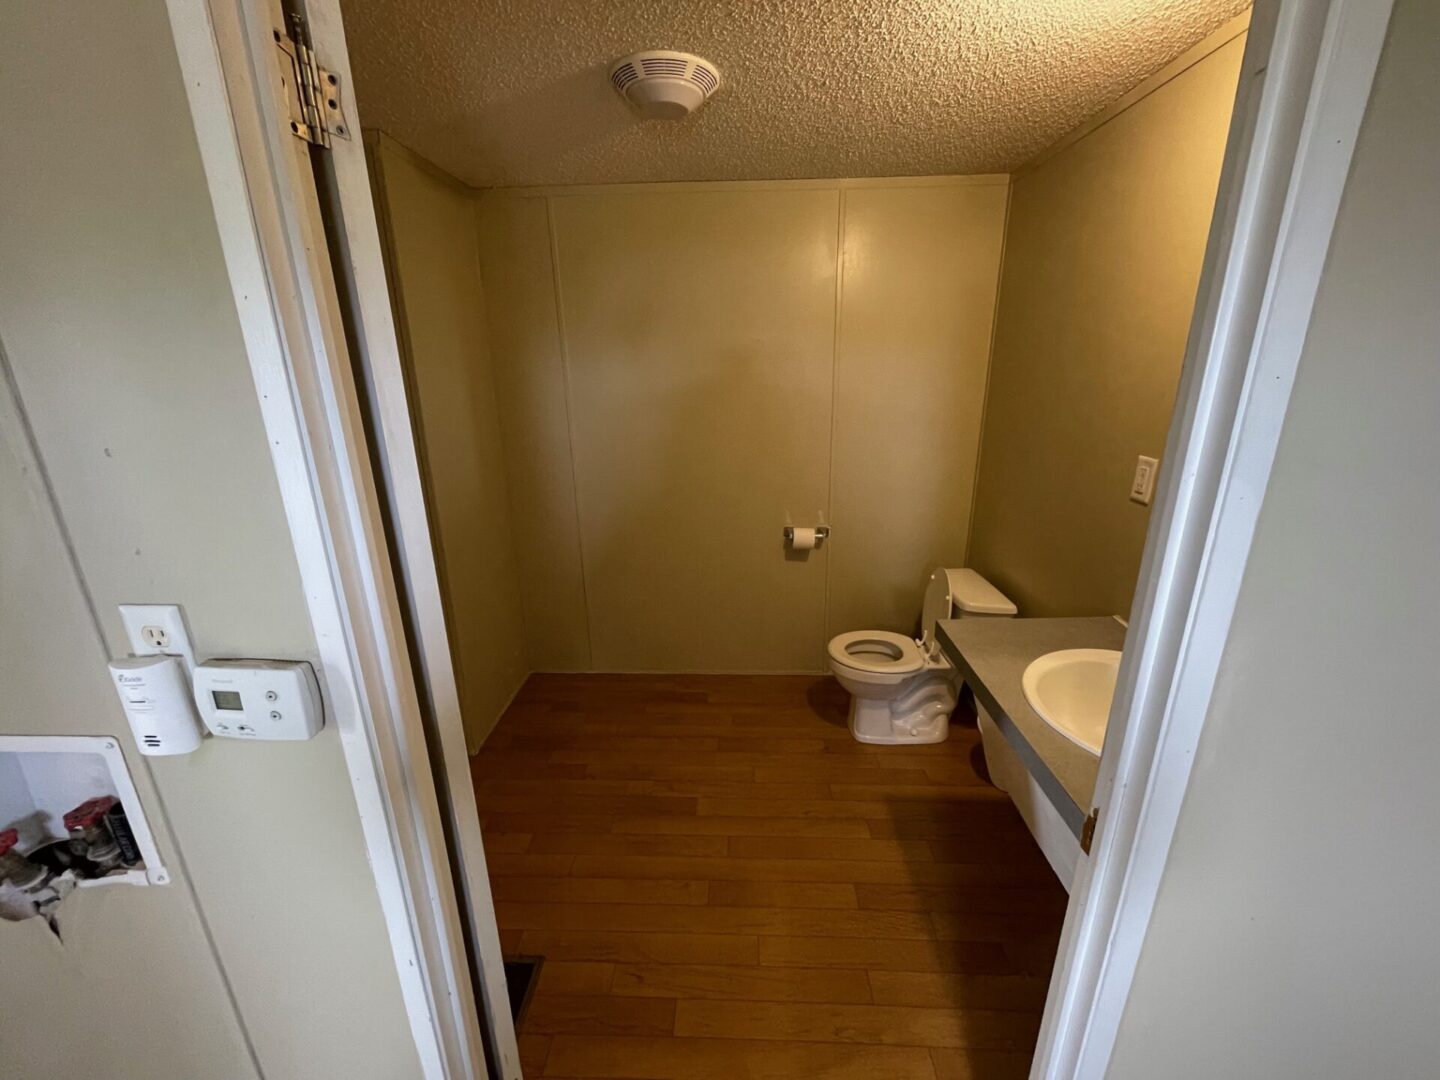 A view of a bathroom with a toilet and sink.